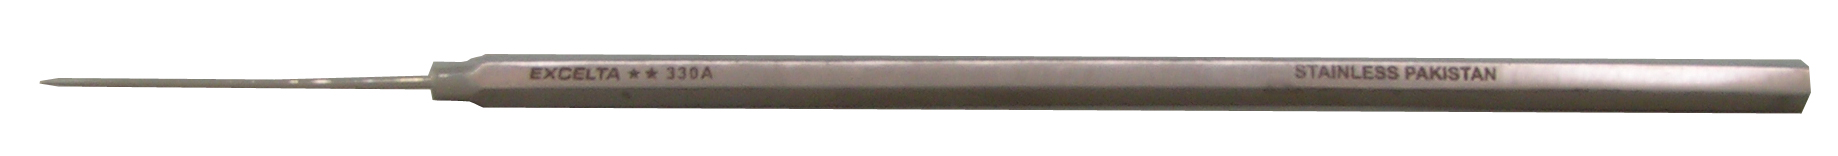 Excelta 330A 6 Inch Stainless Steel Straight Probe With .10 Inch Tip